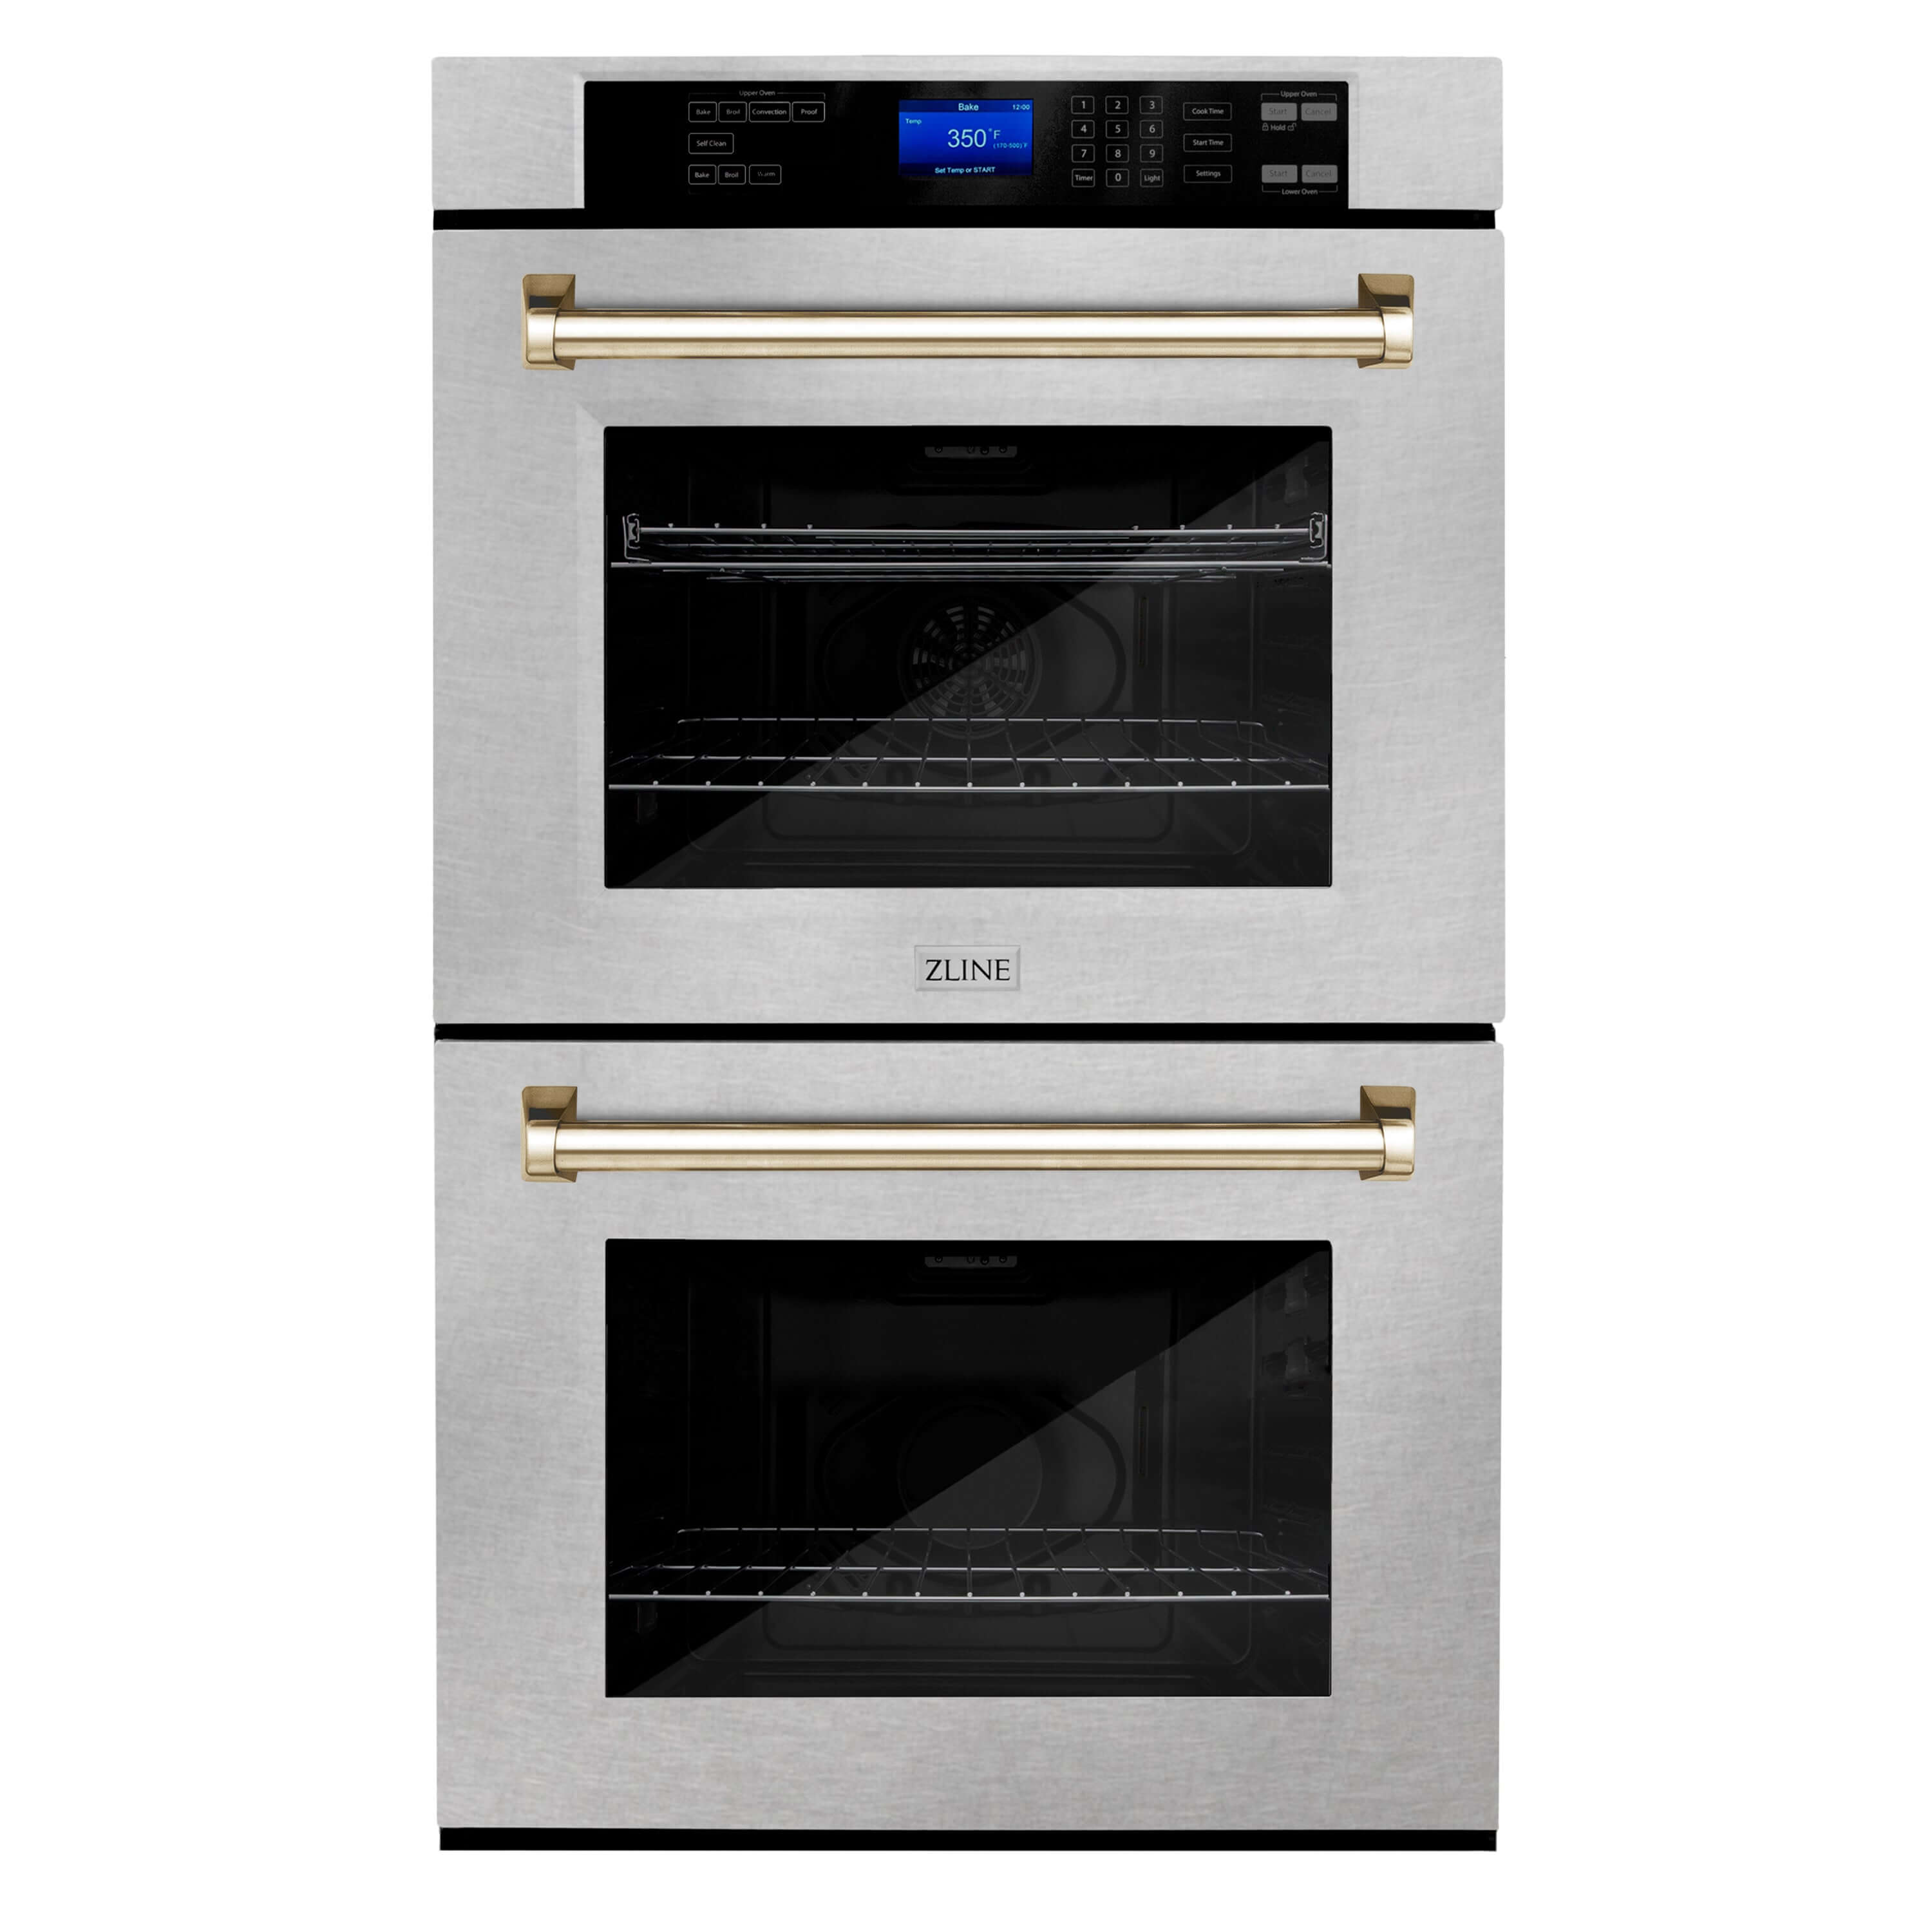 ZLINE Autograph Edition 30 in. Electric Double Wall Oven with Self Clean and True Convection in DuraSnow® Stainless Steel and Polished Gold Accents (AWDSZ-30-G) front, oven closed.